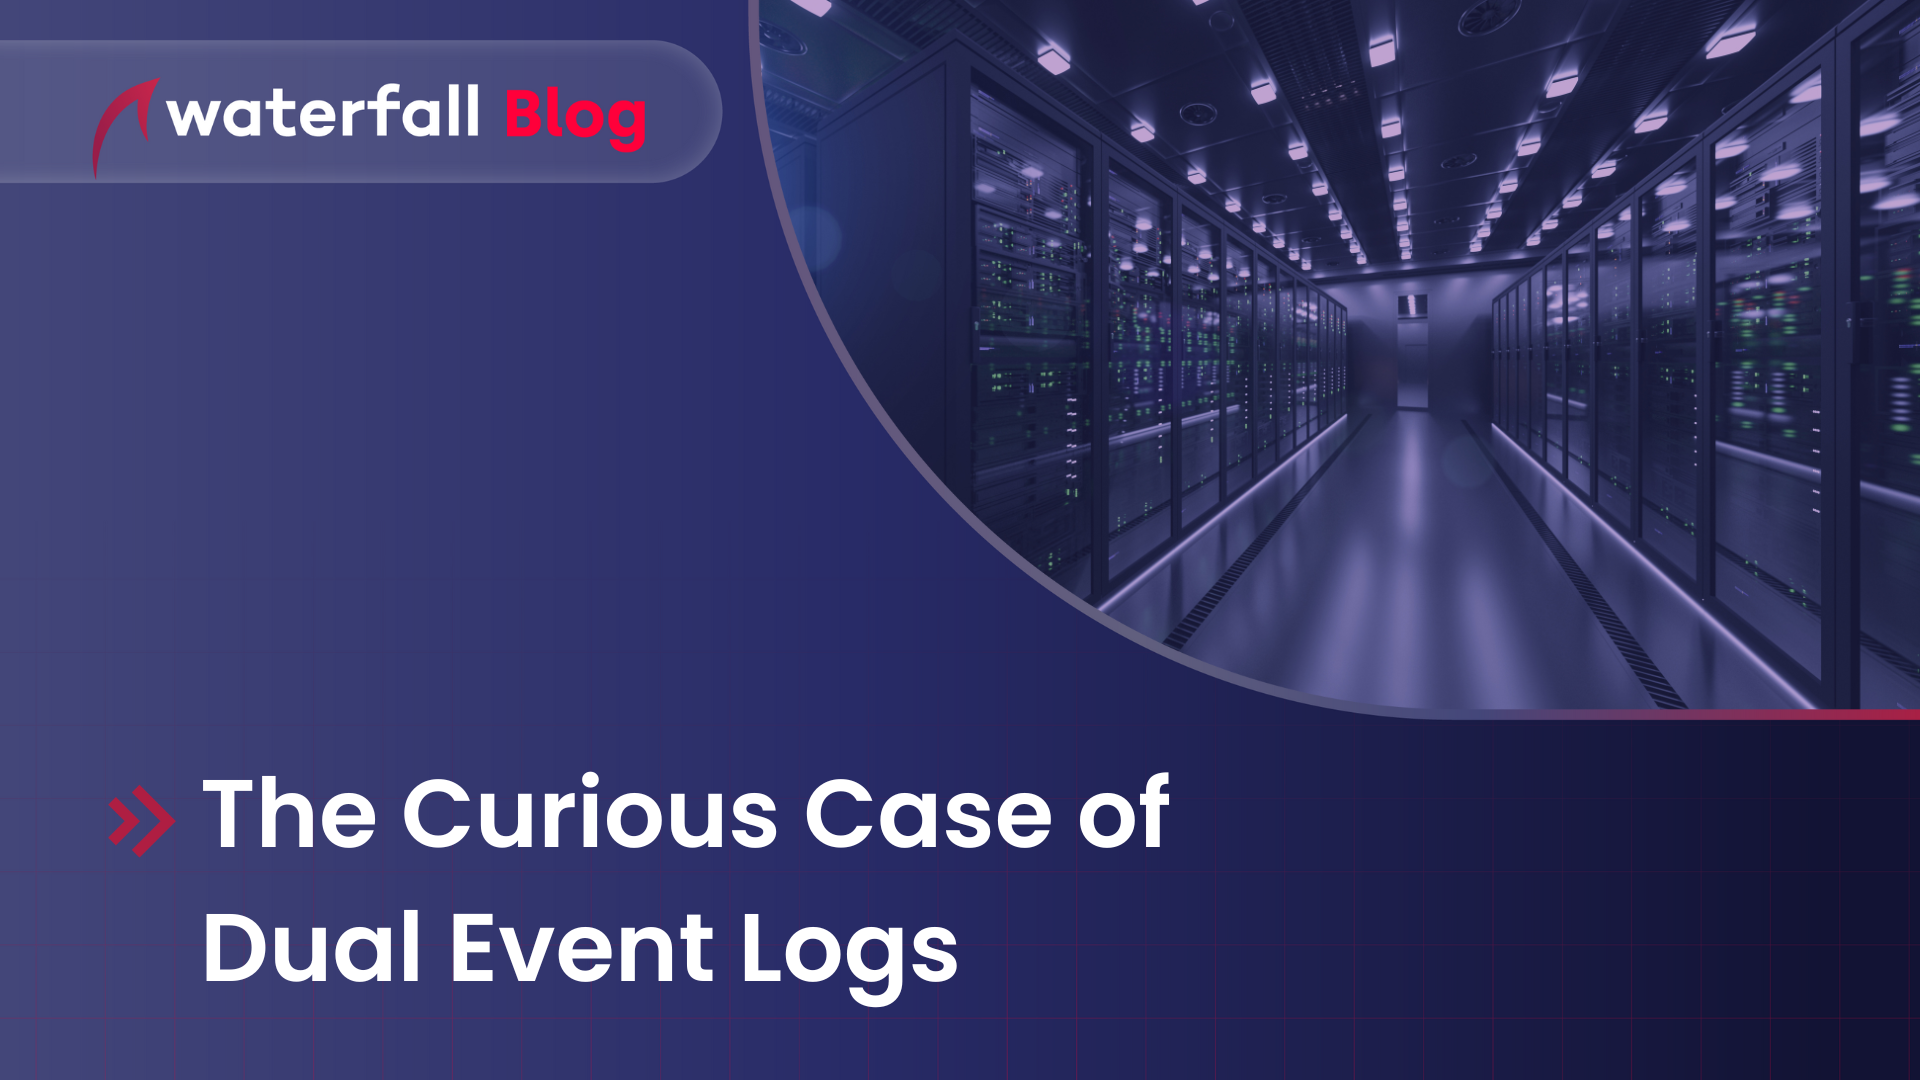 The Curious Case of Dual Event Logs